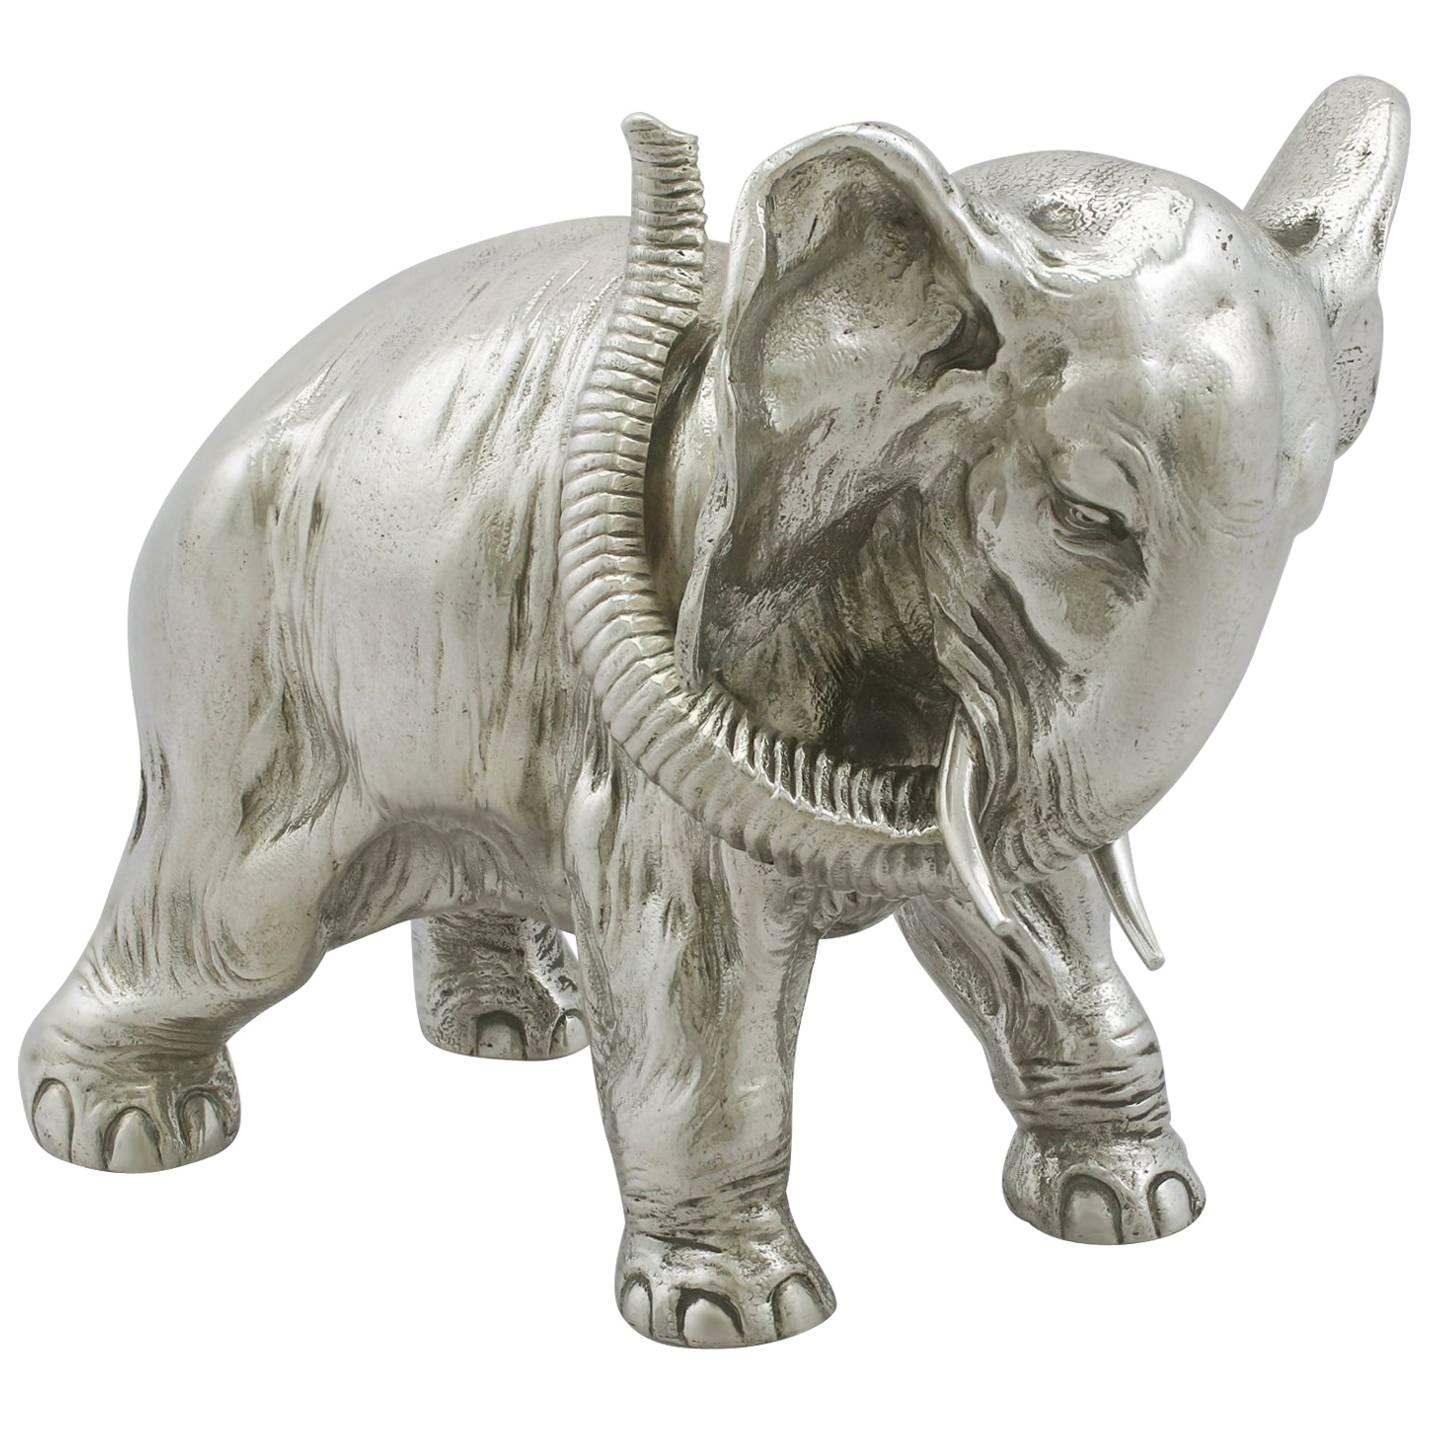 1890s Antique Russian Silver Table Ornament of an Elephant by Karl Fabergé